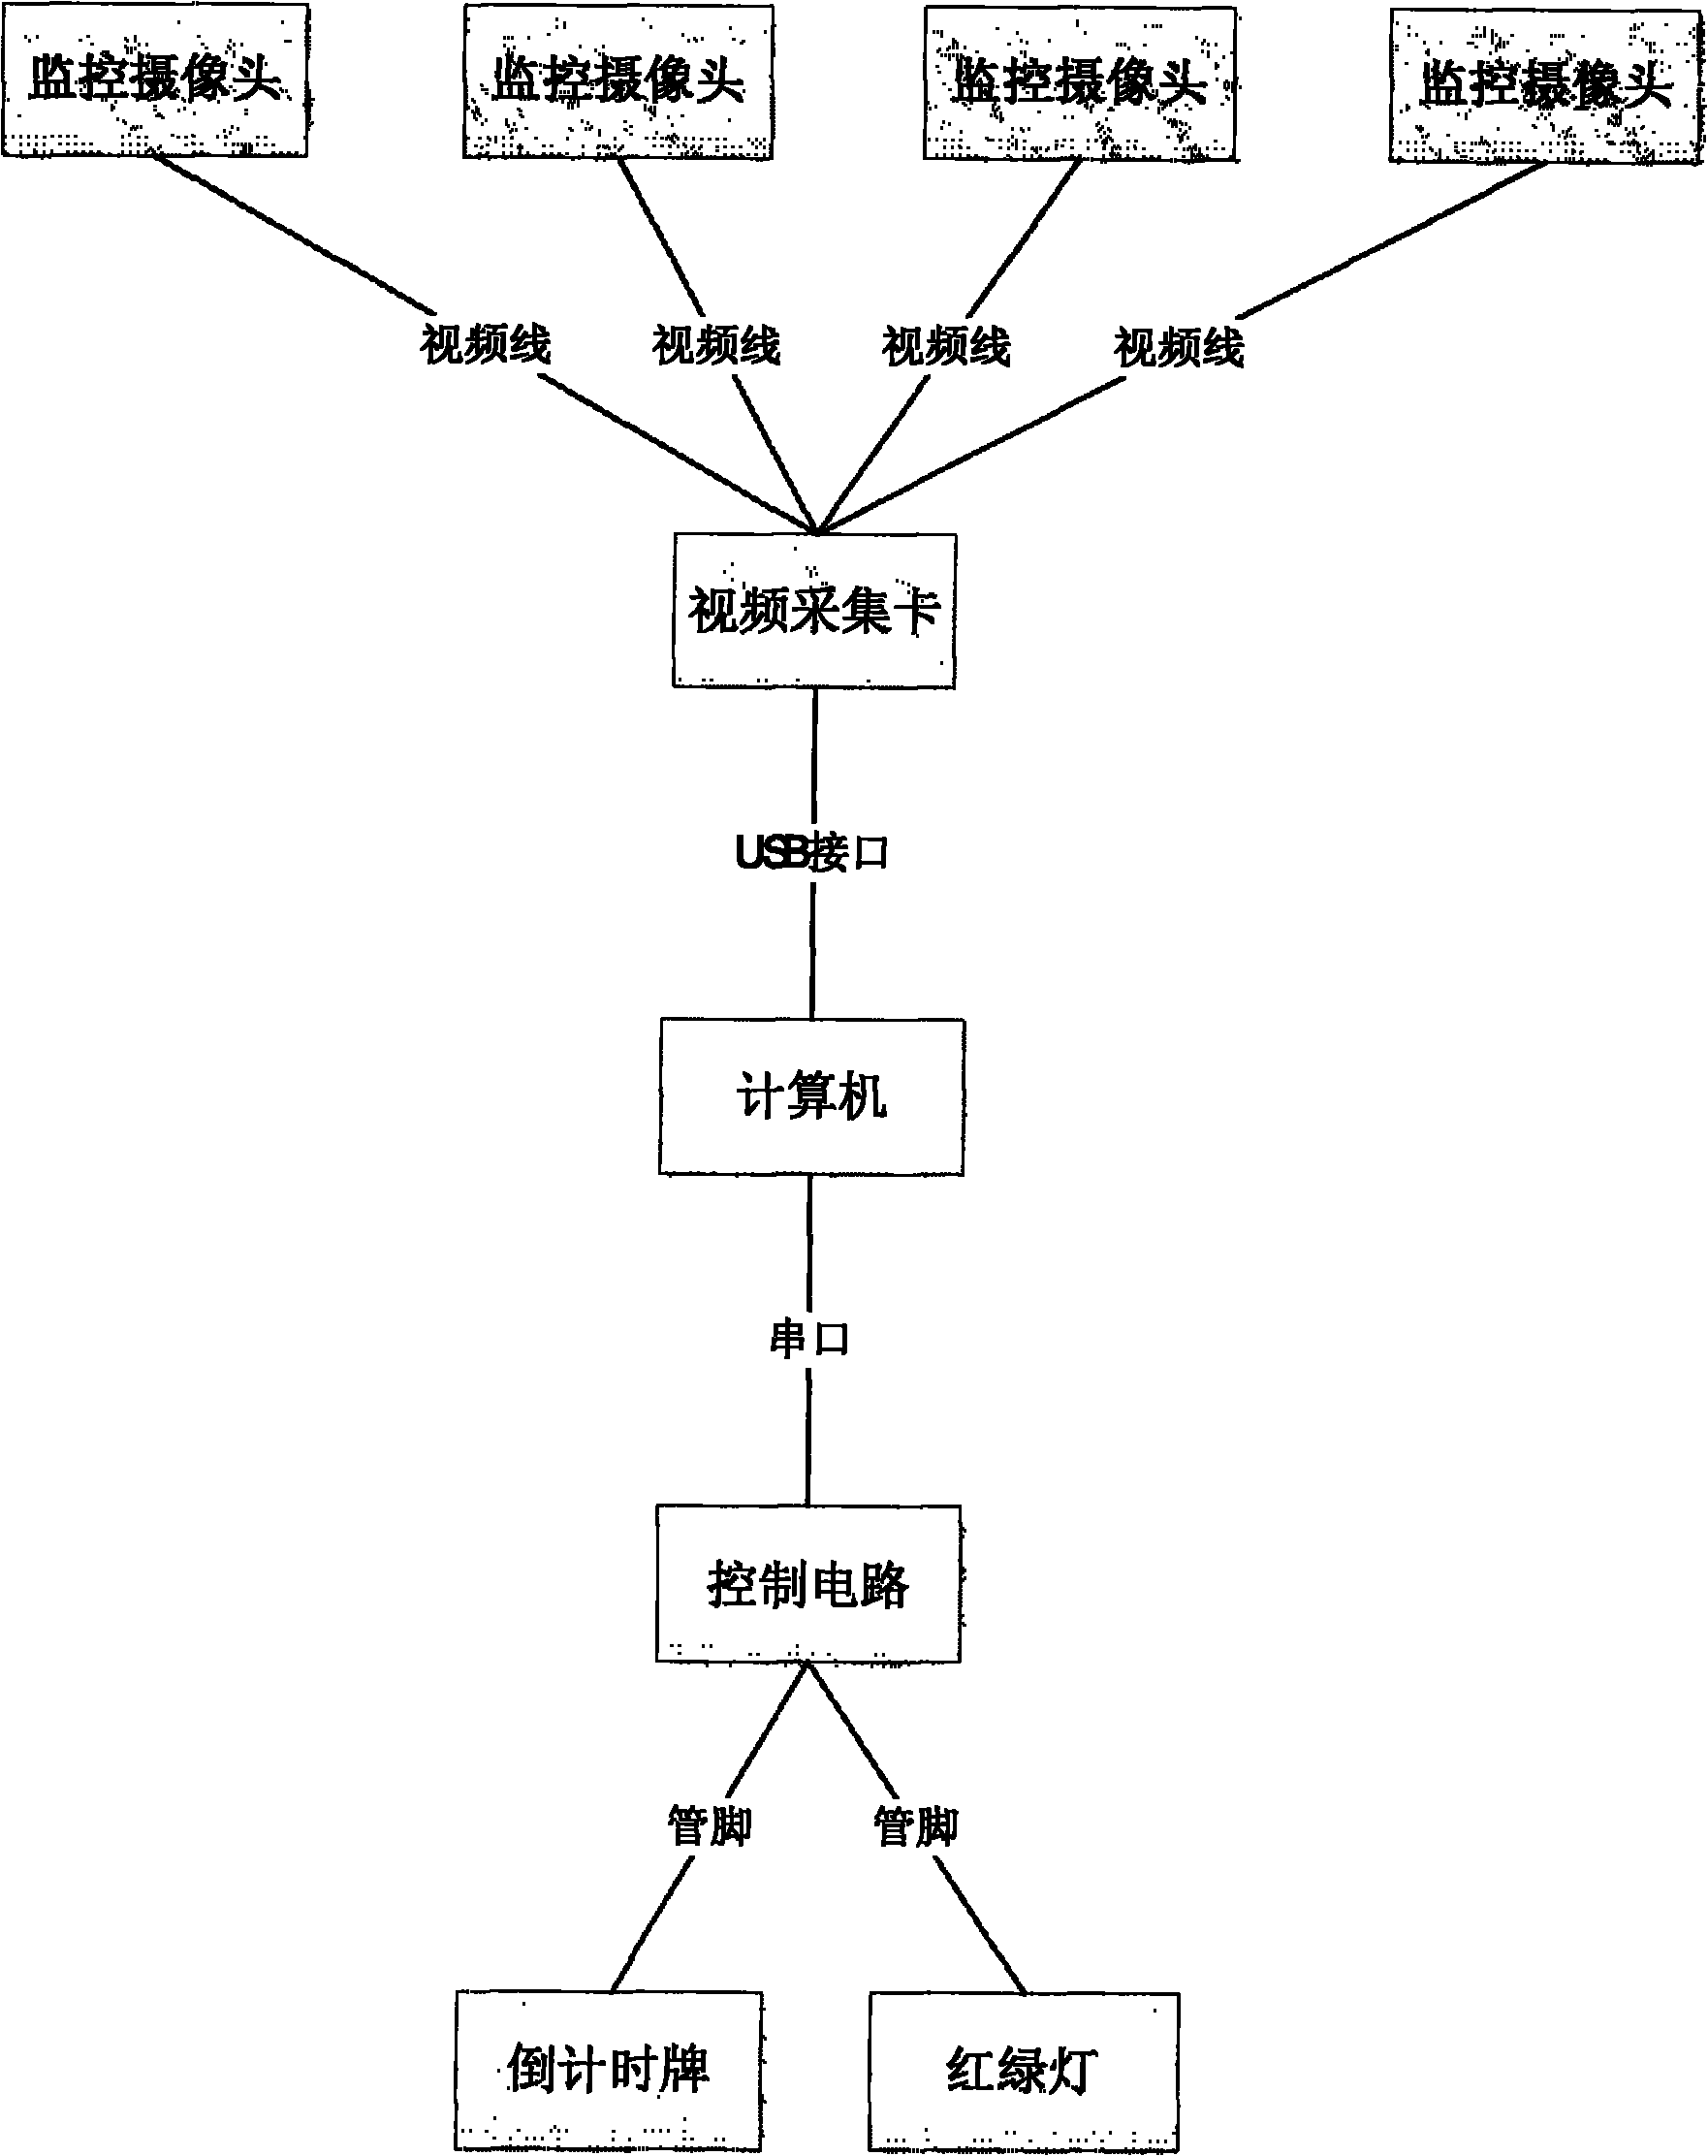 Vehicle counting-based traffic light control system and control method thereof